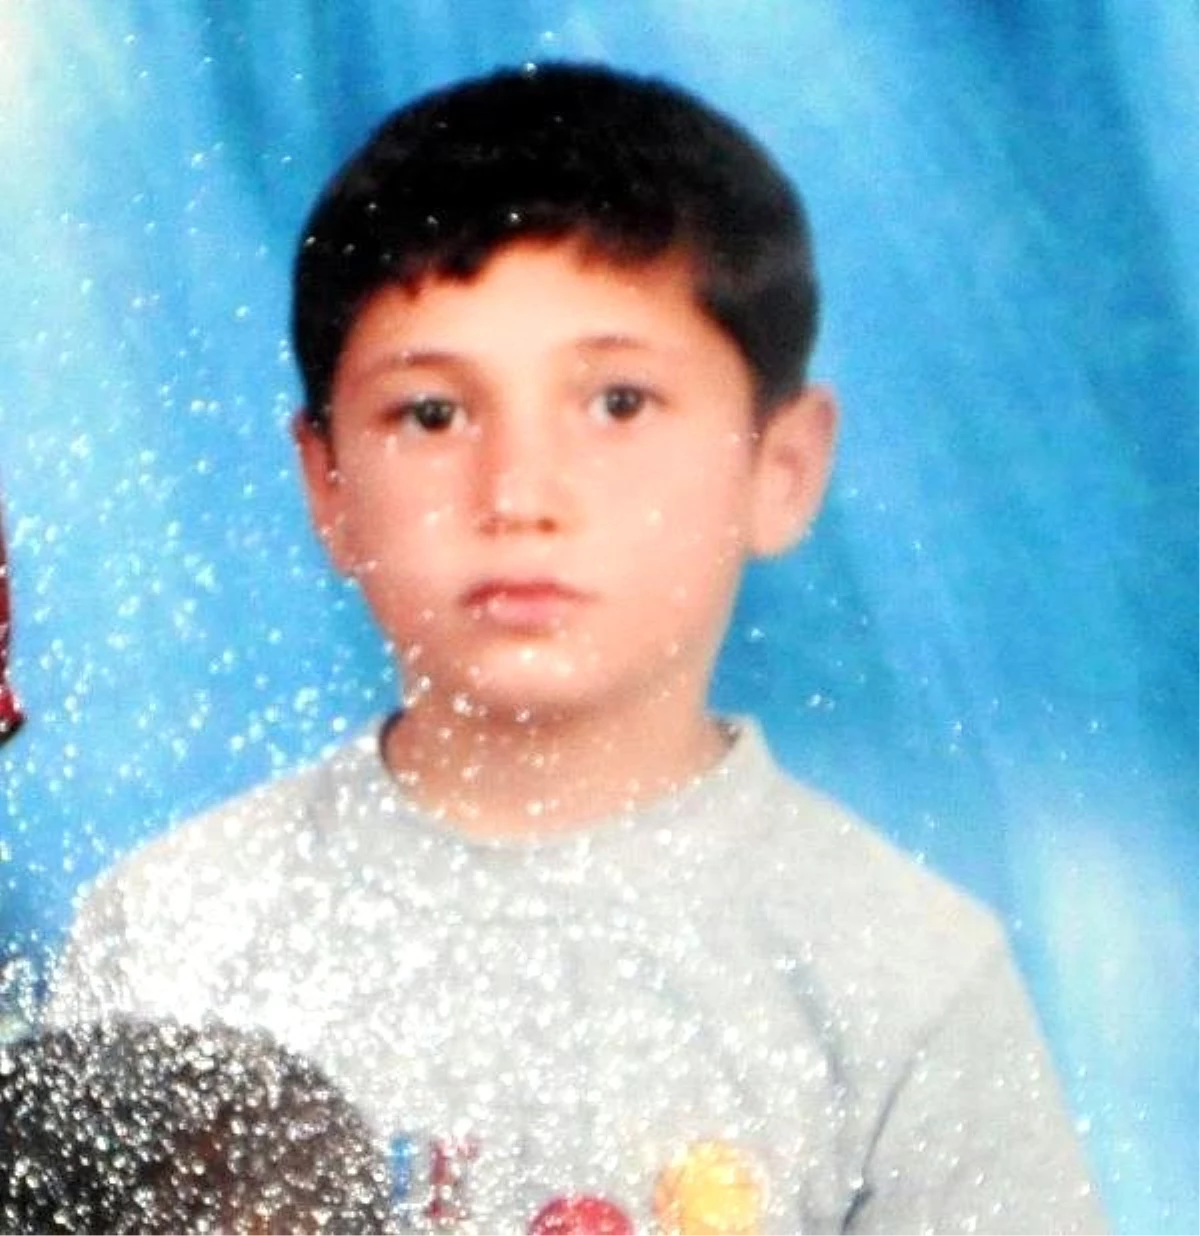 Policeman Confesses That Colleague Killed 12-year-old İn Cizre